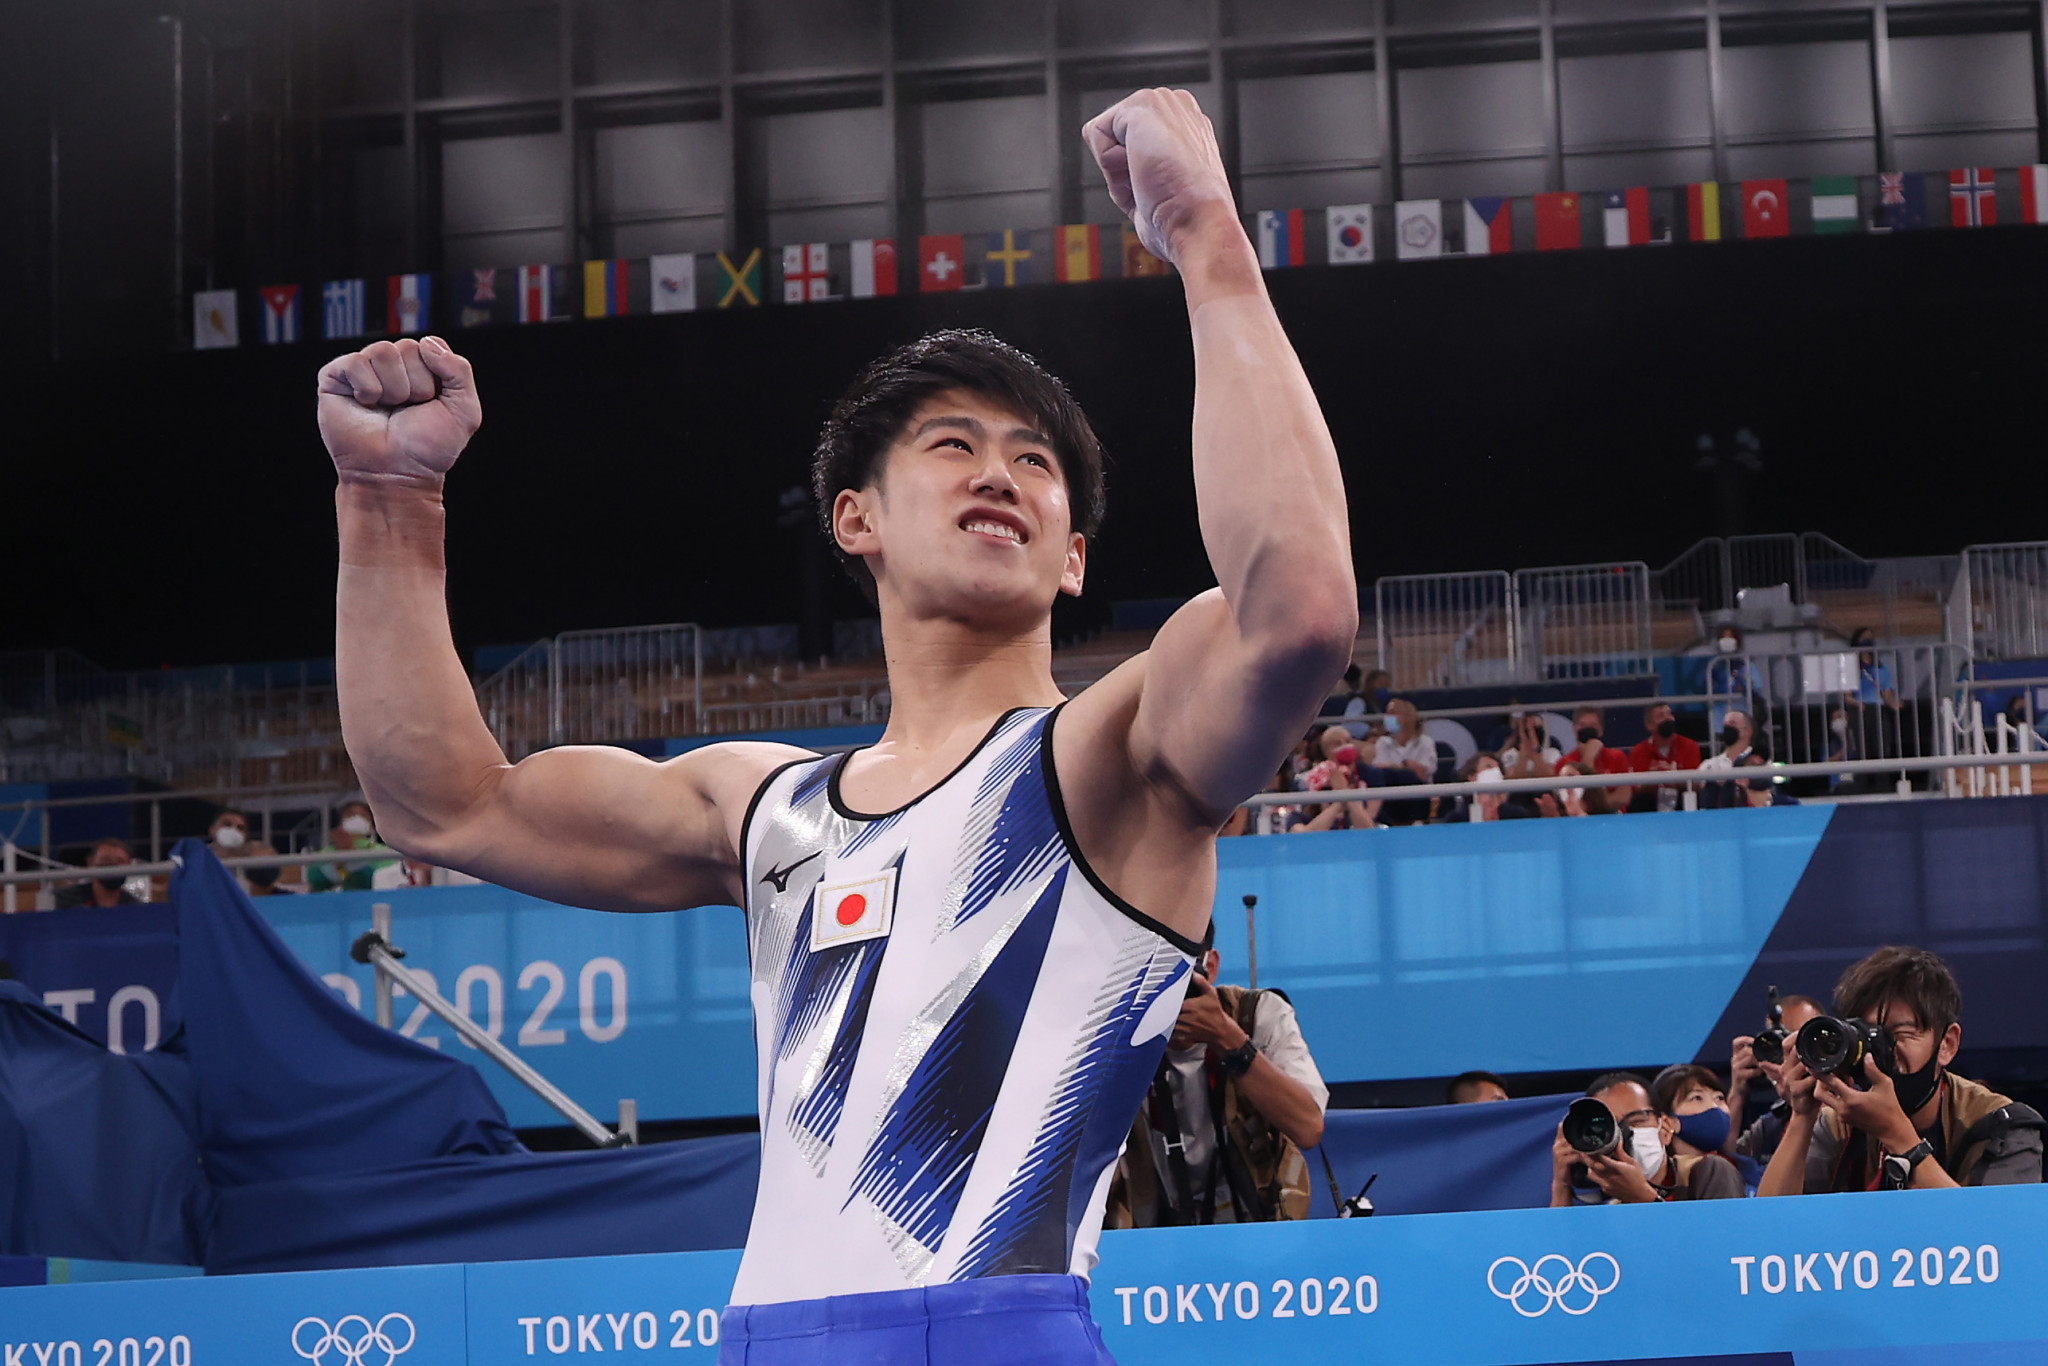 Daiki Hashimoto won two gymnastics gold medals for Japan at the Tokyo 2020 Olympics ©Getty Images